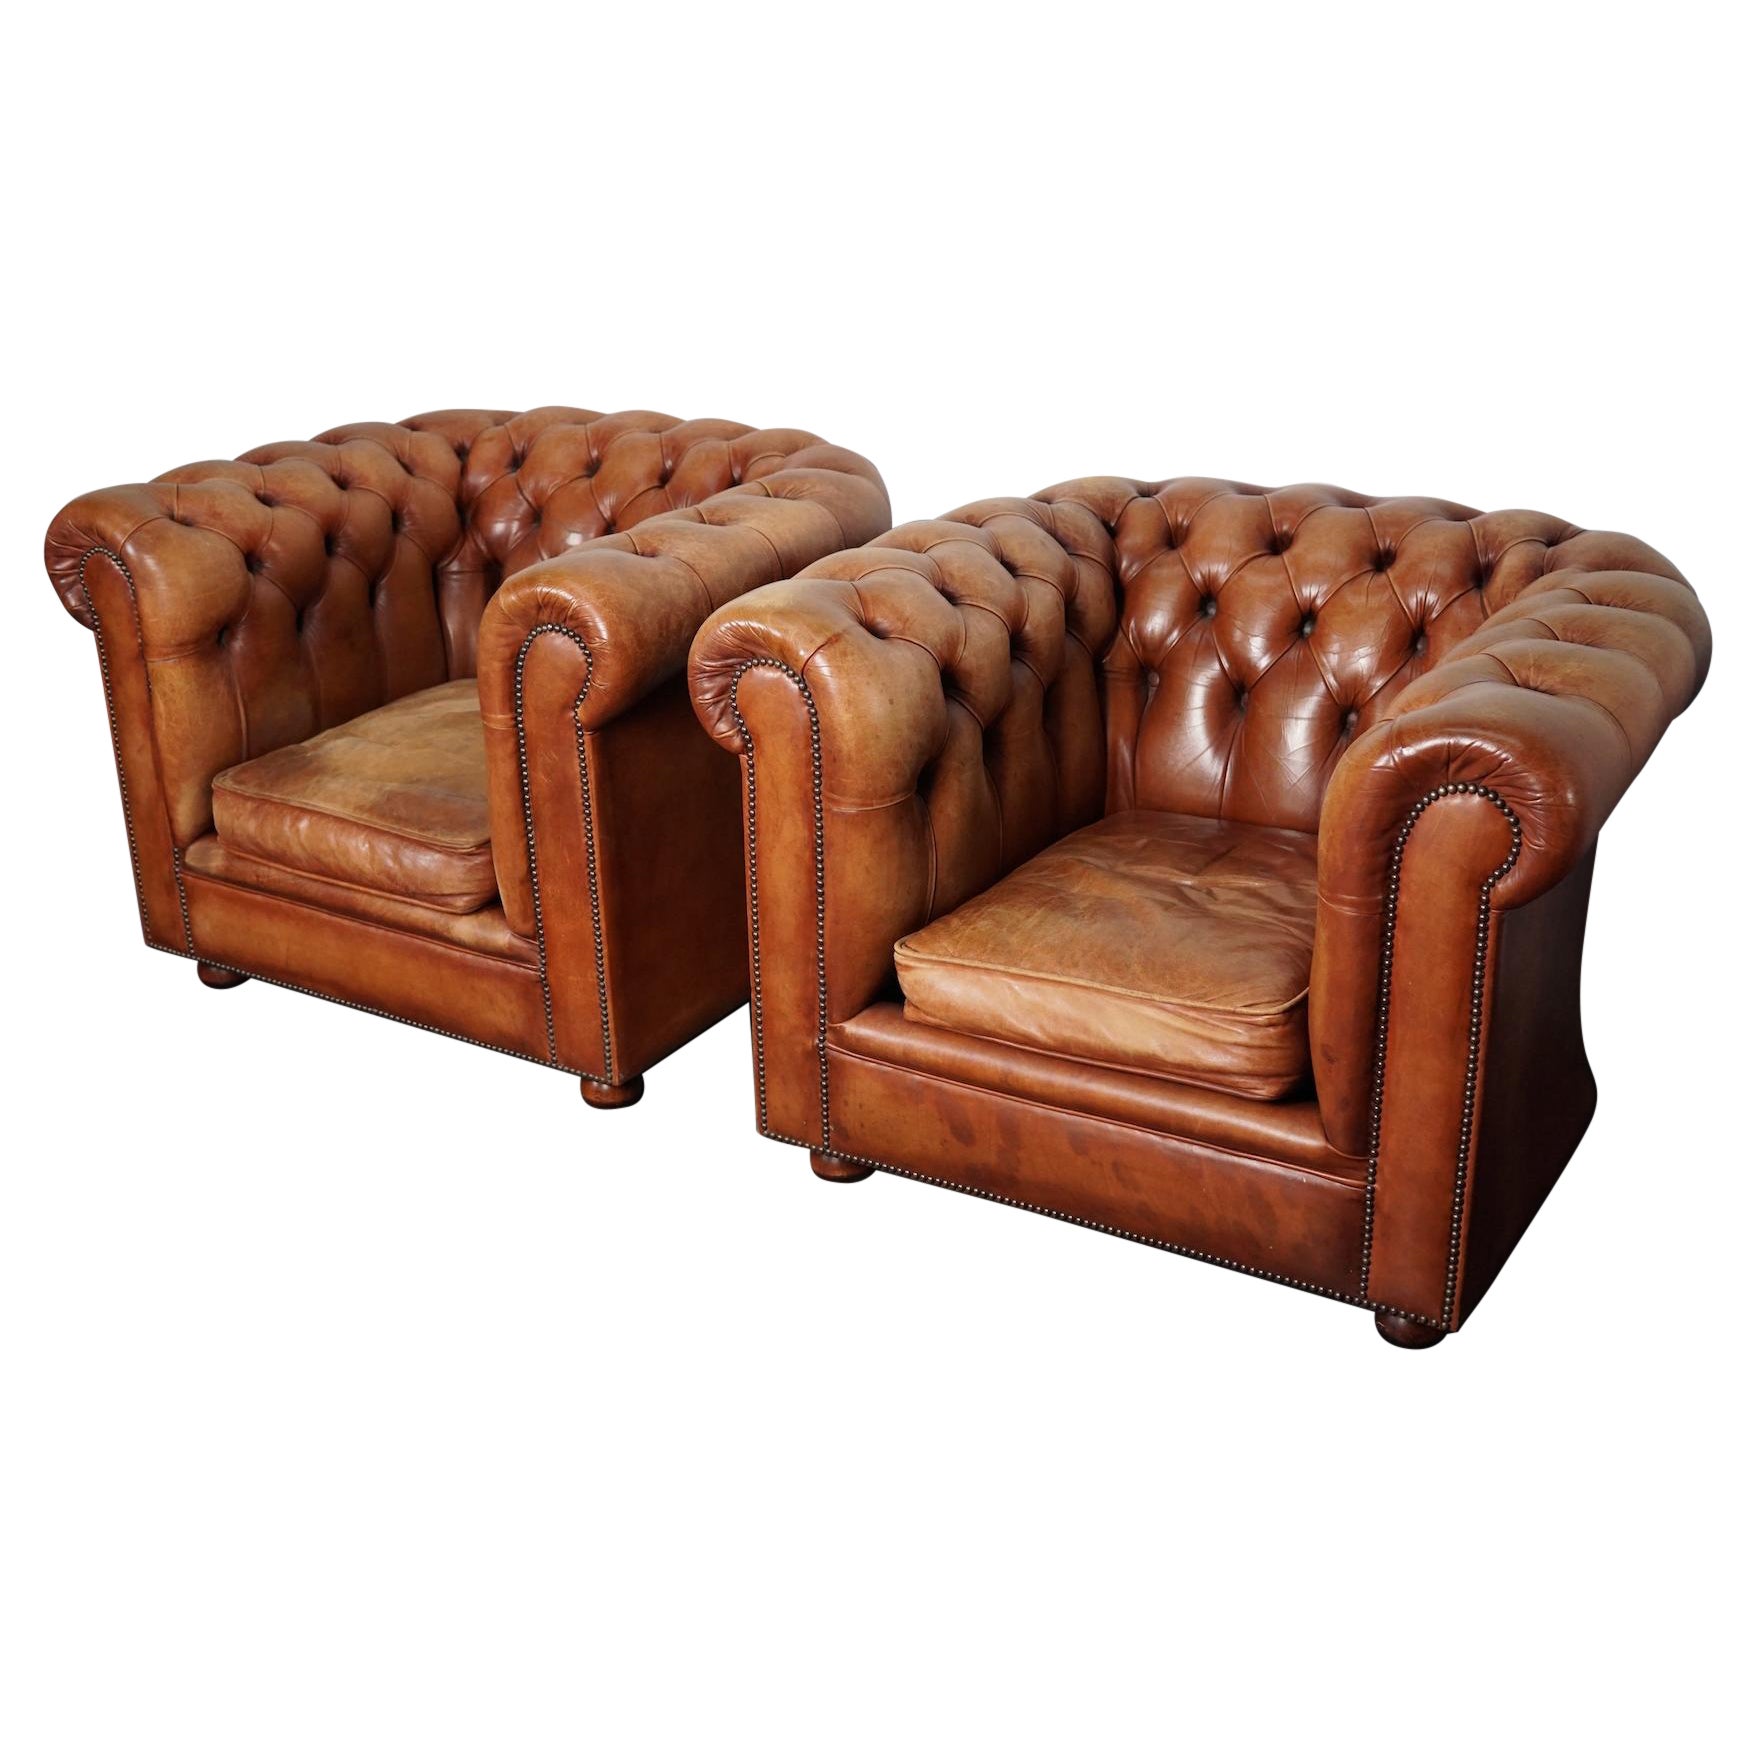 Vintage Dutch Cognac Leather Chesterfield Club Chairs, Set of 2